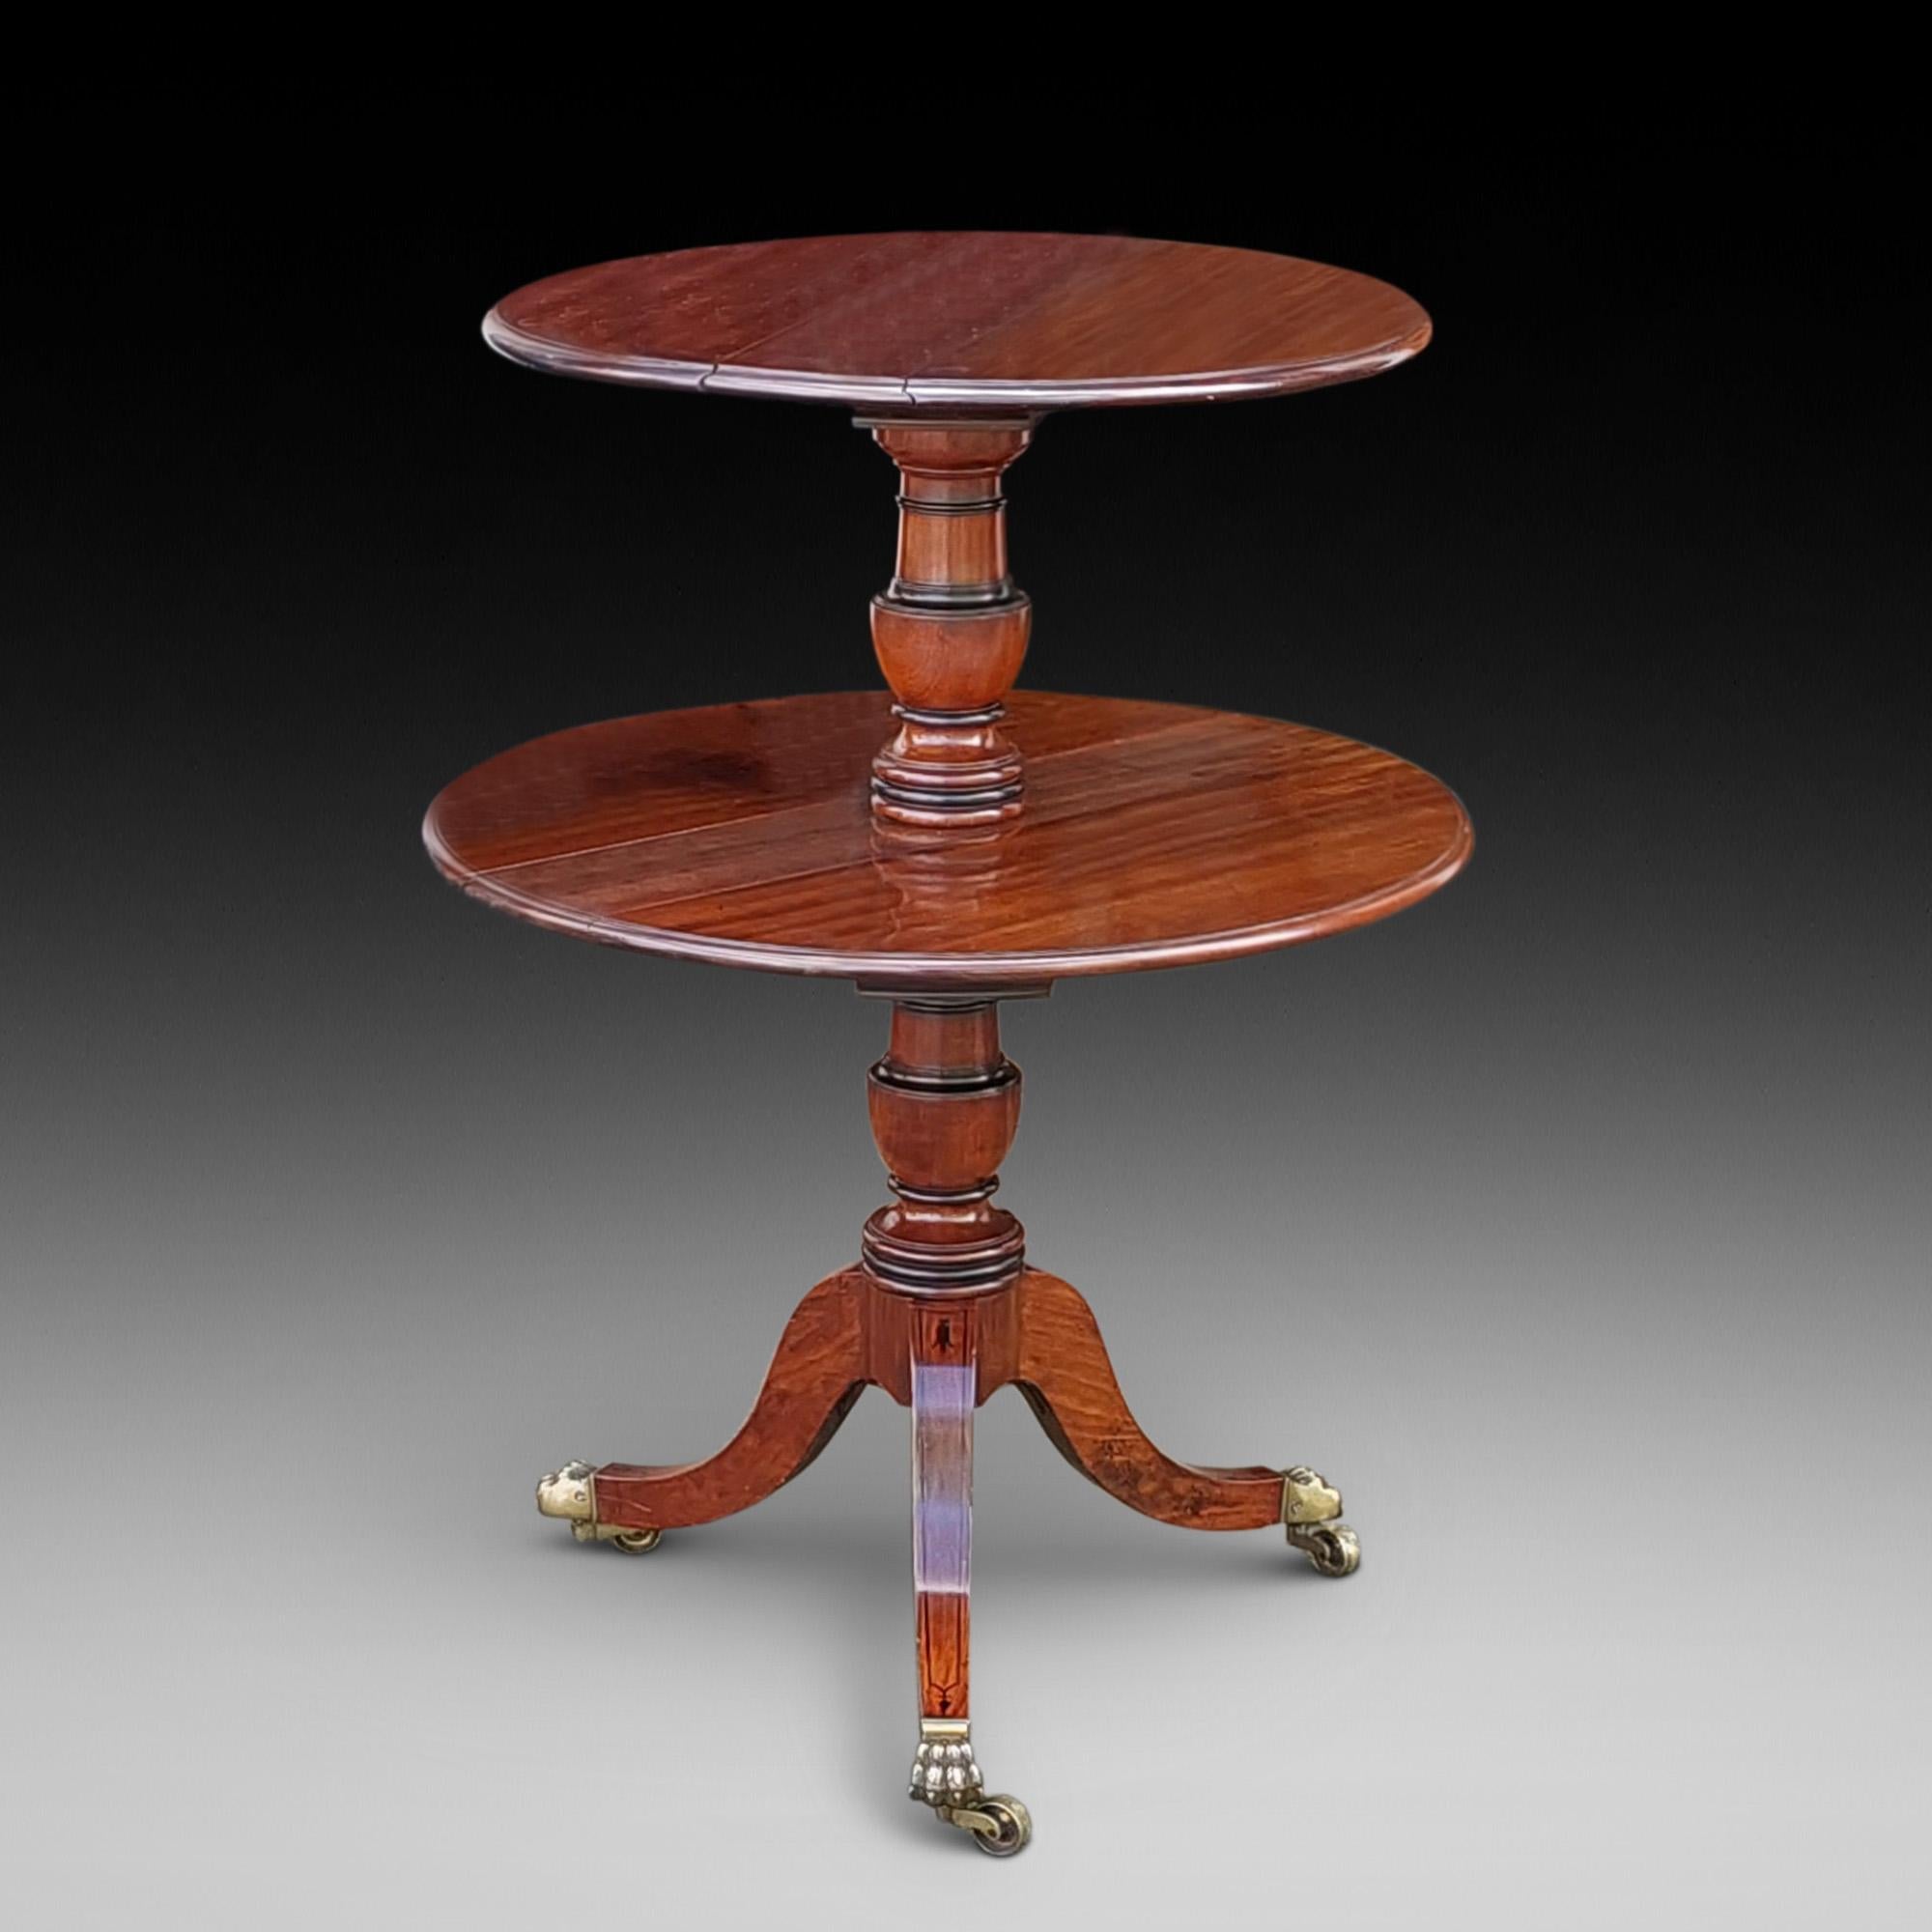 Late George III Mahogany Folding Dumb Waiter Whatnot with 2 tiers supported by turned baluster column on tripod sabre legs with ebony inlay on brass lion paw cup castors - 25